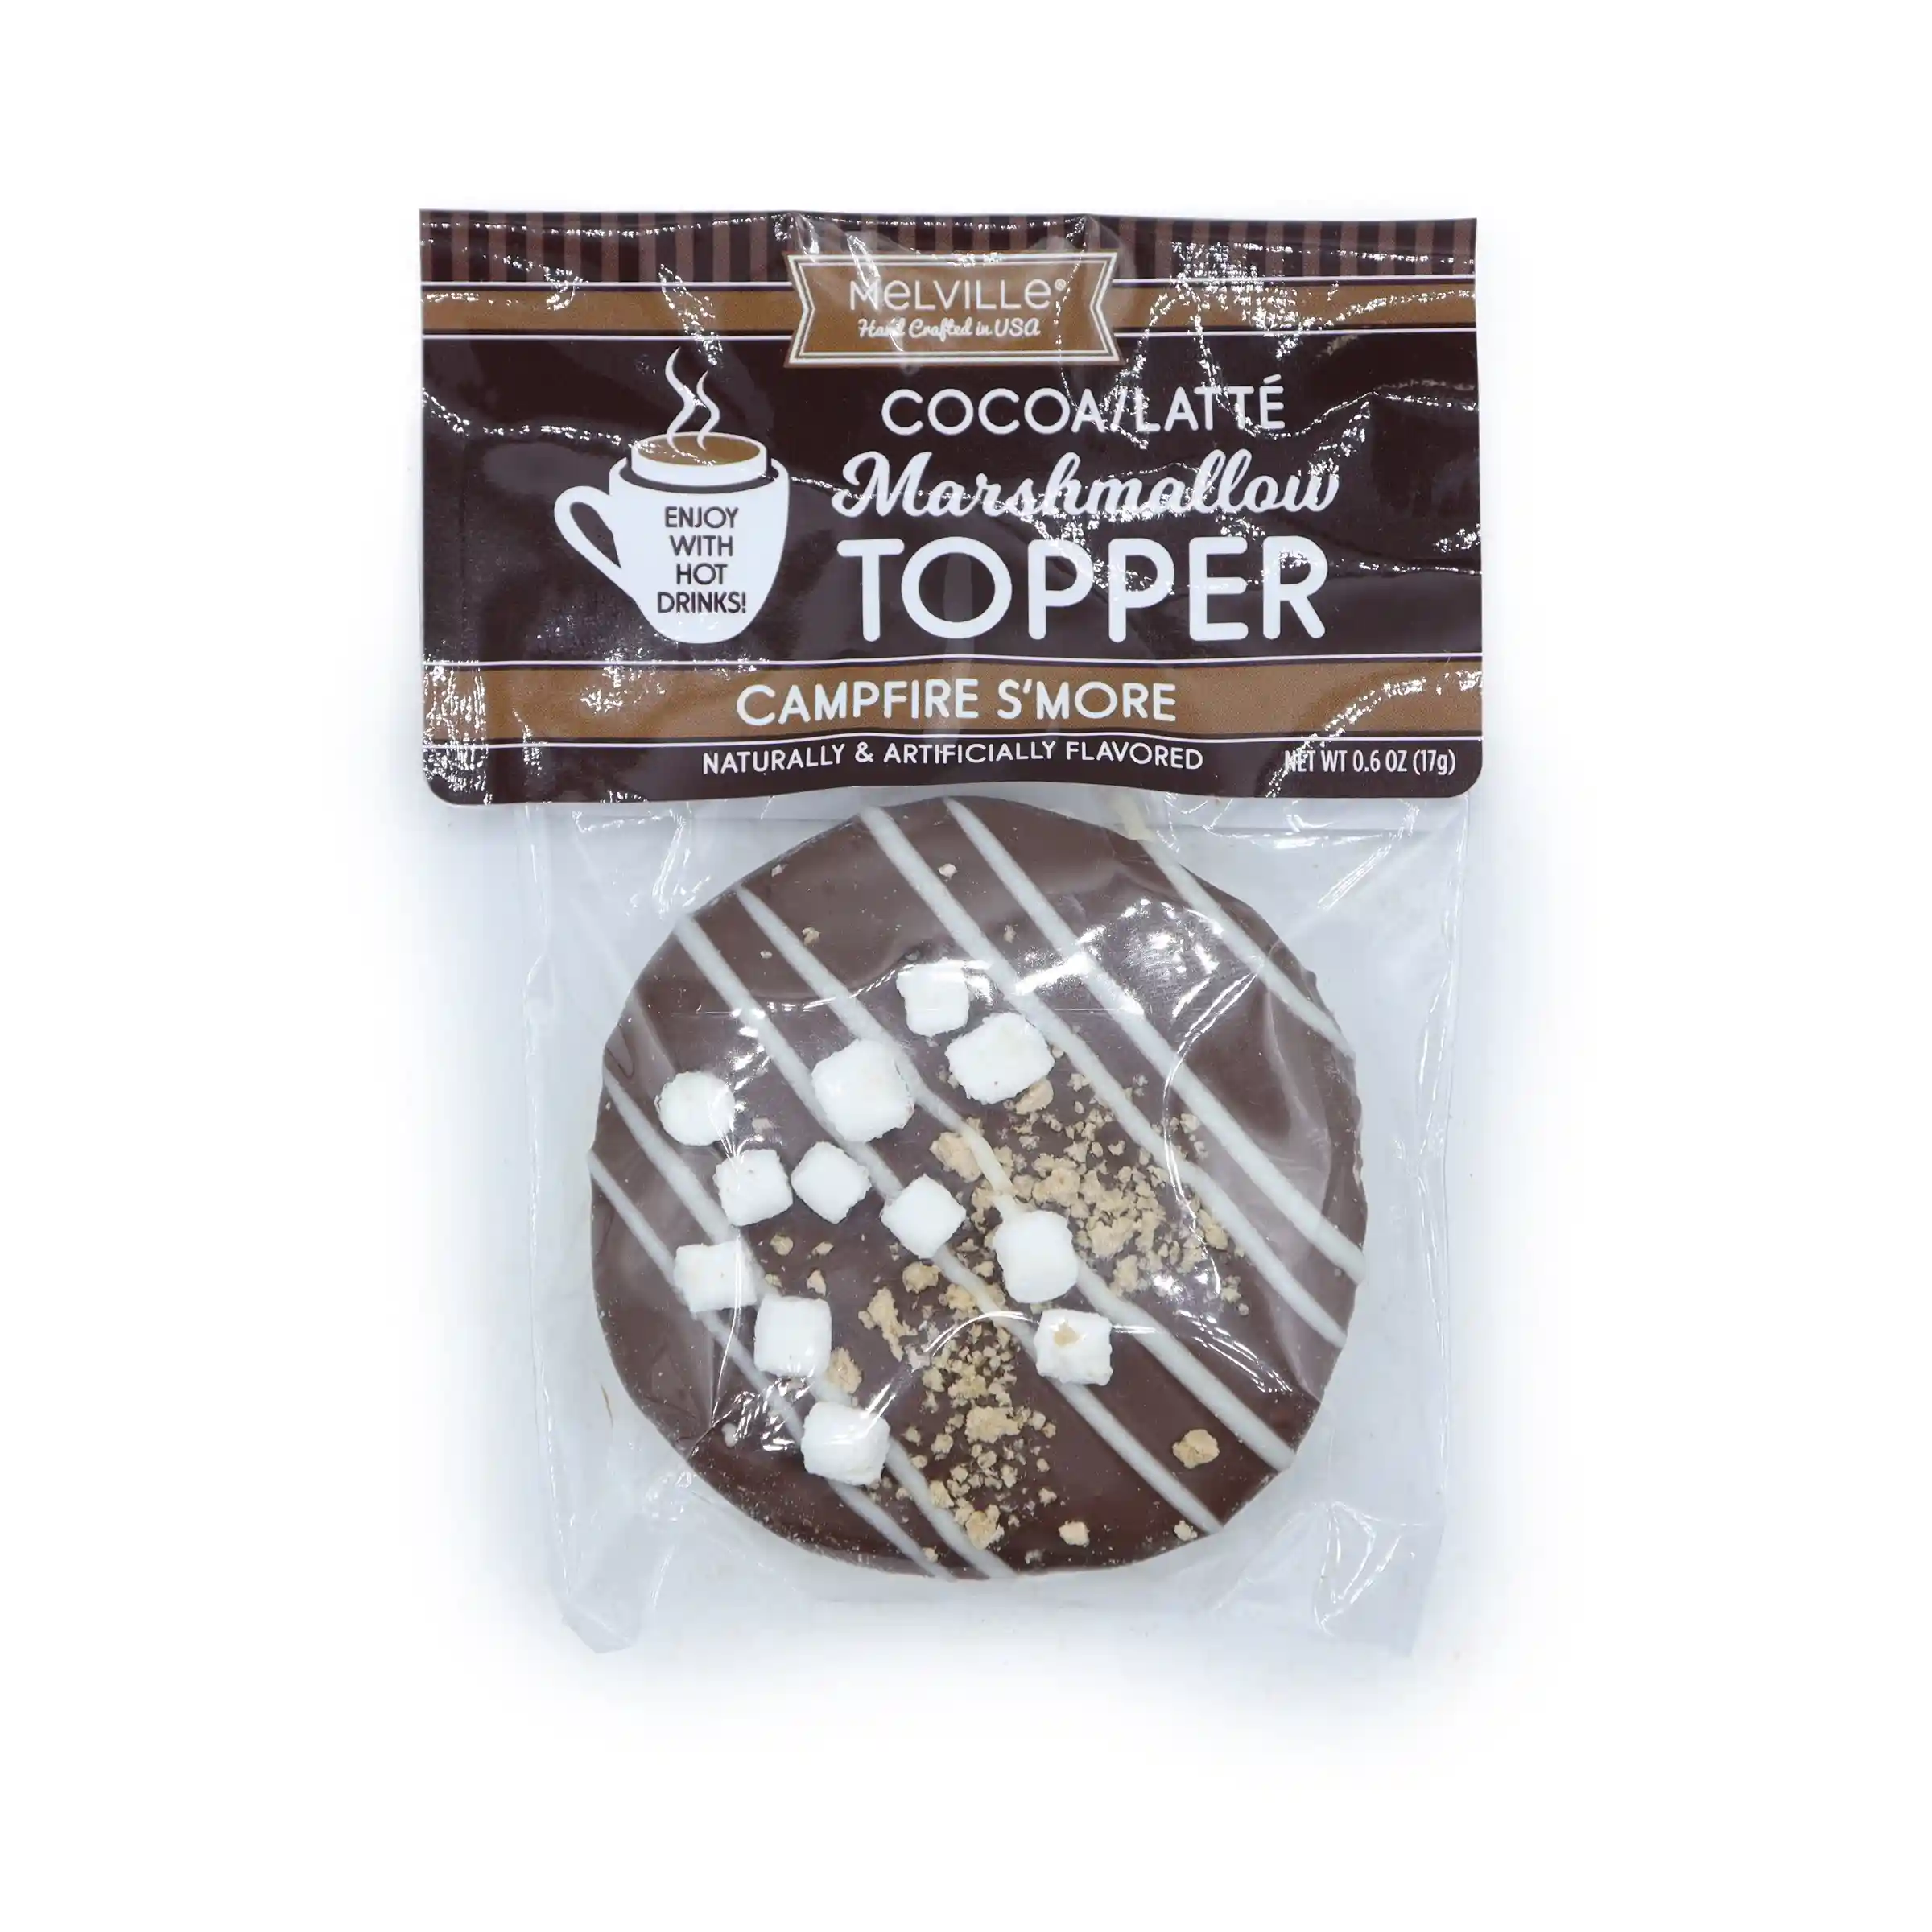 Marshmallow Edible Hot Cocoa Snowman Drink Toppers, 2.5 oz., 12